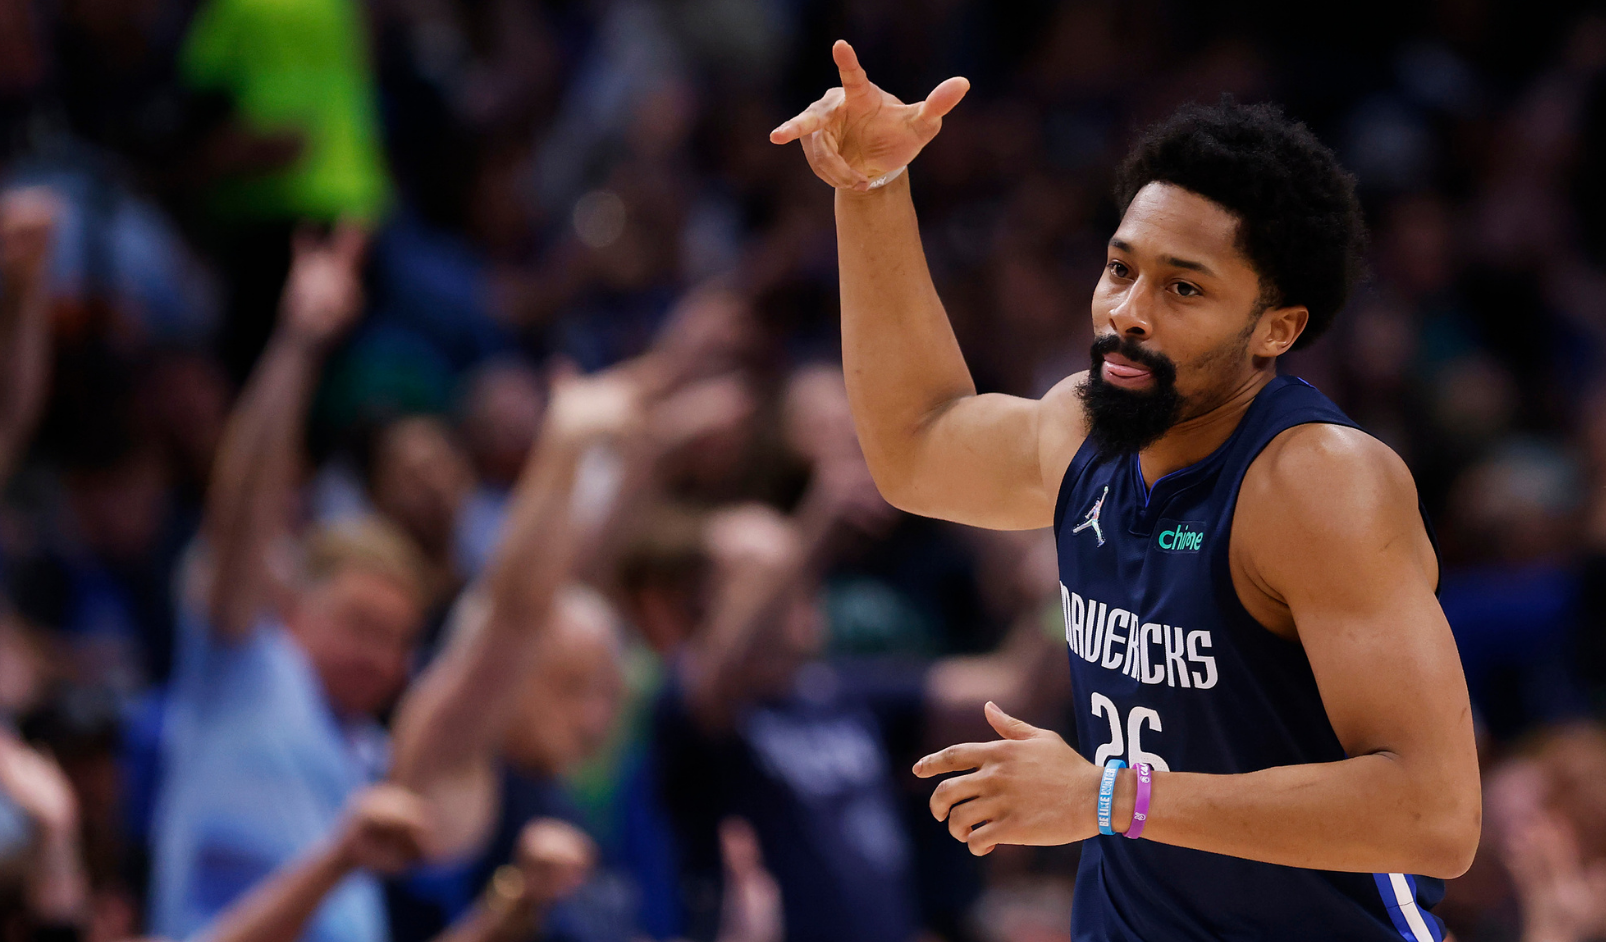 CU's Spencer Dinwiddie celebrates Fourth by playing hoops for USA in Russia, Sports